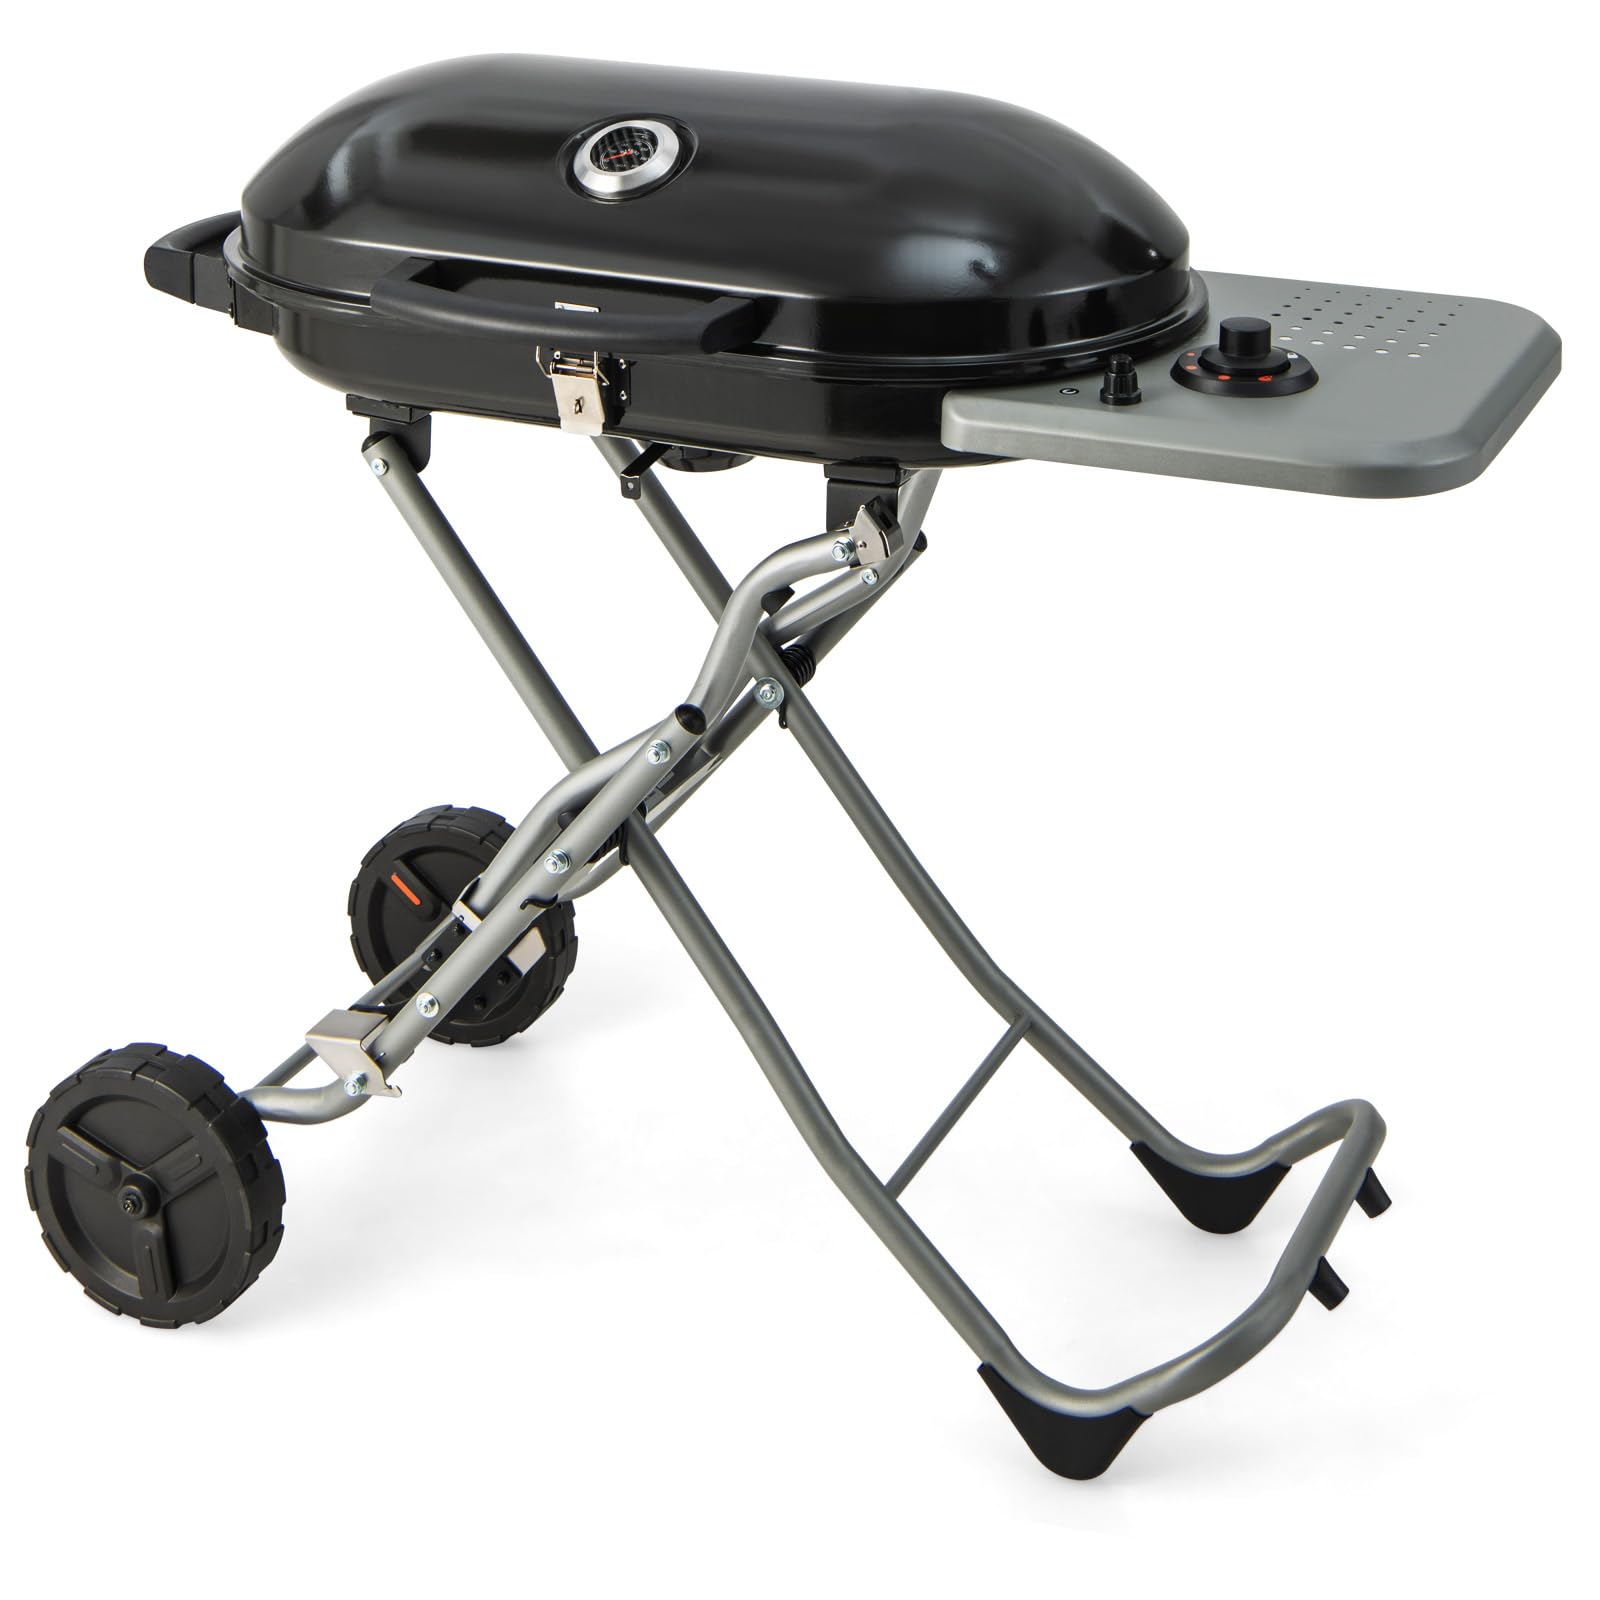 Giantex Gas Grill, Portable Propane Grill with 15,000 BTUs Burner, Side Table, 2 Wheels, Grease Tray